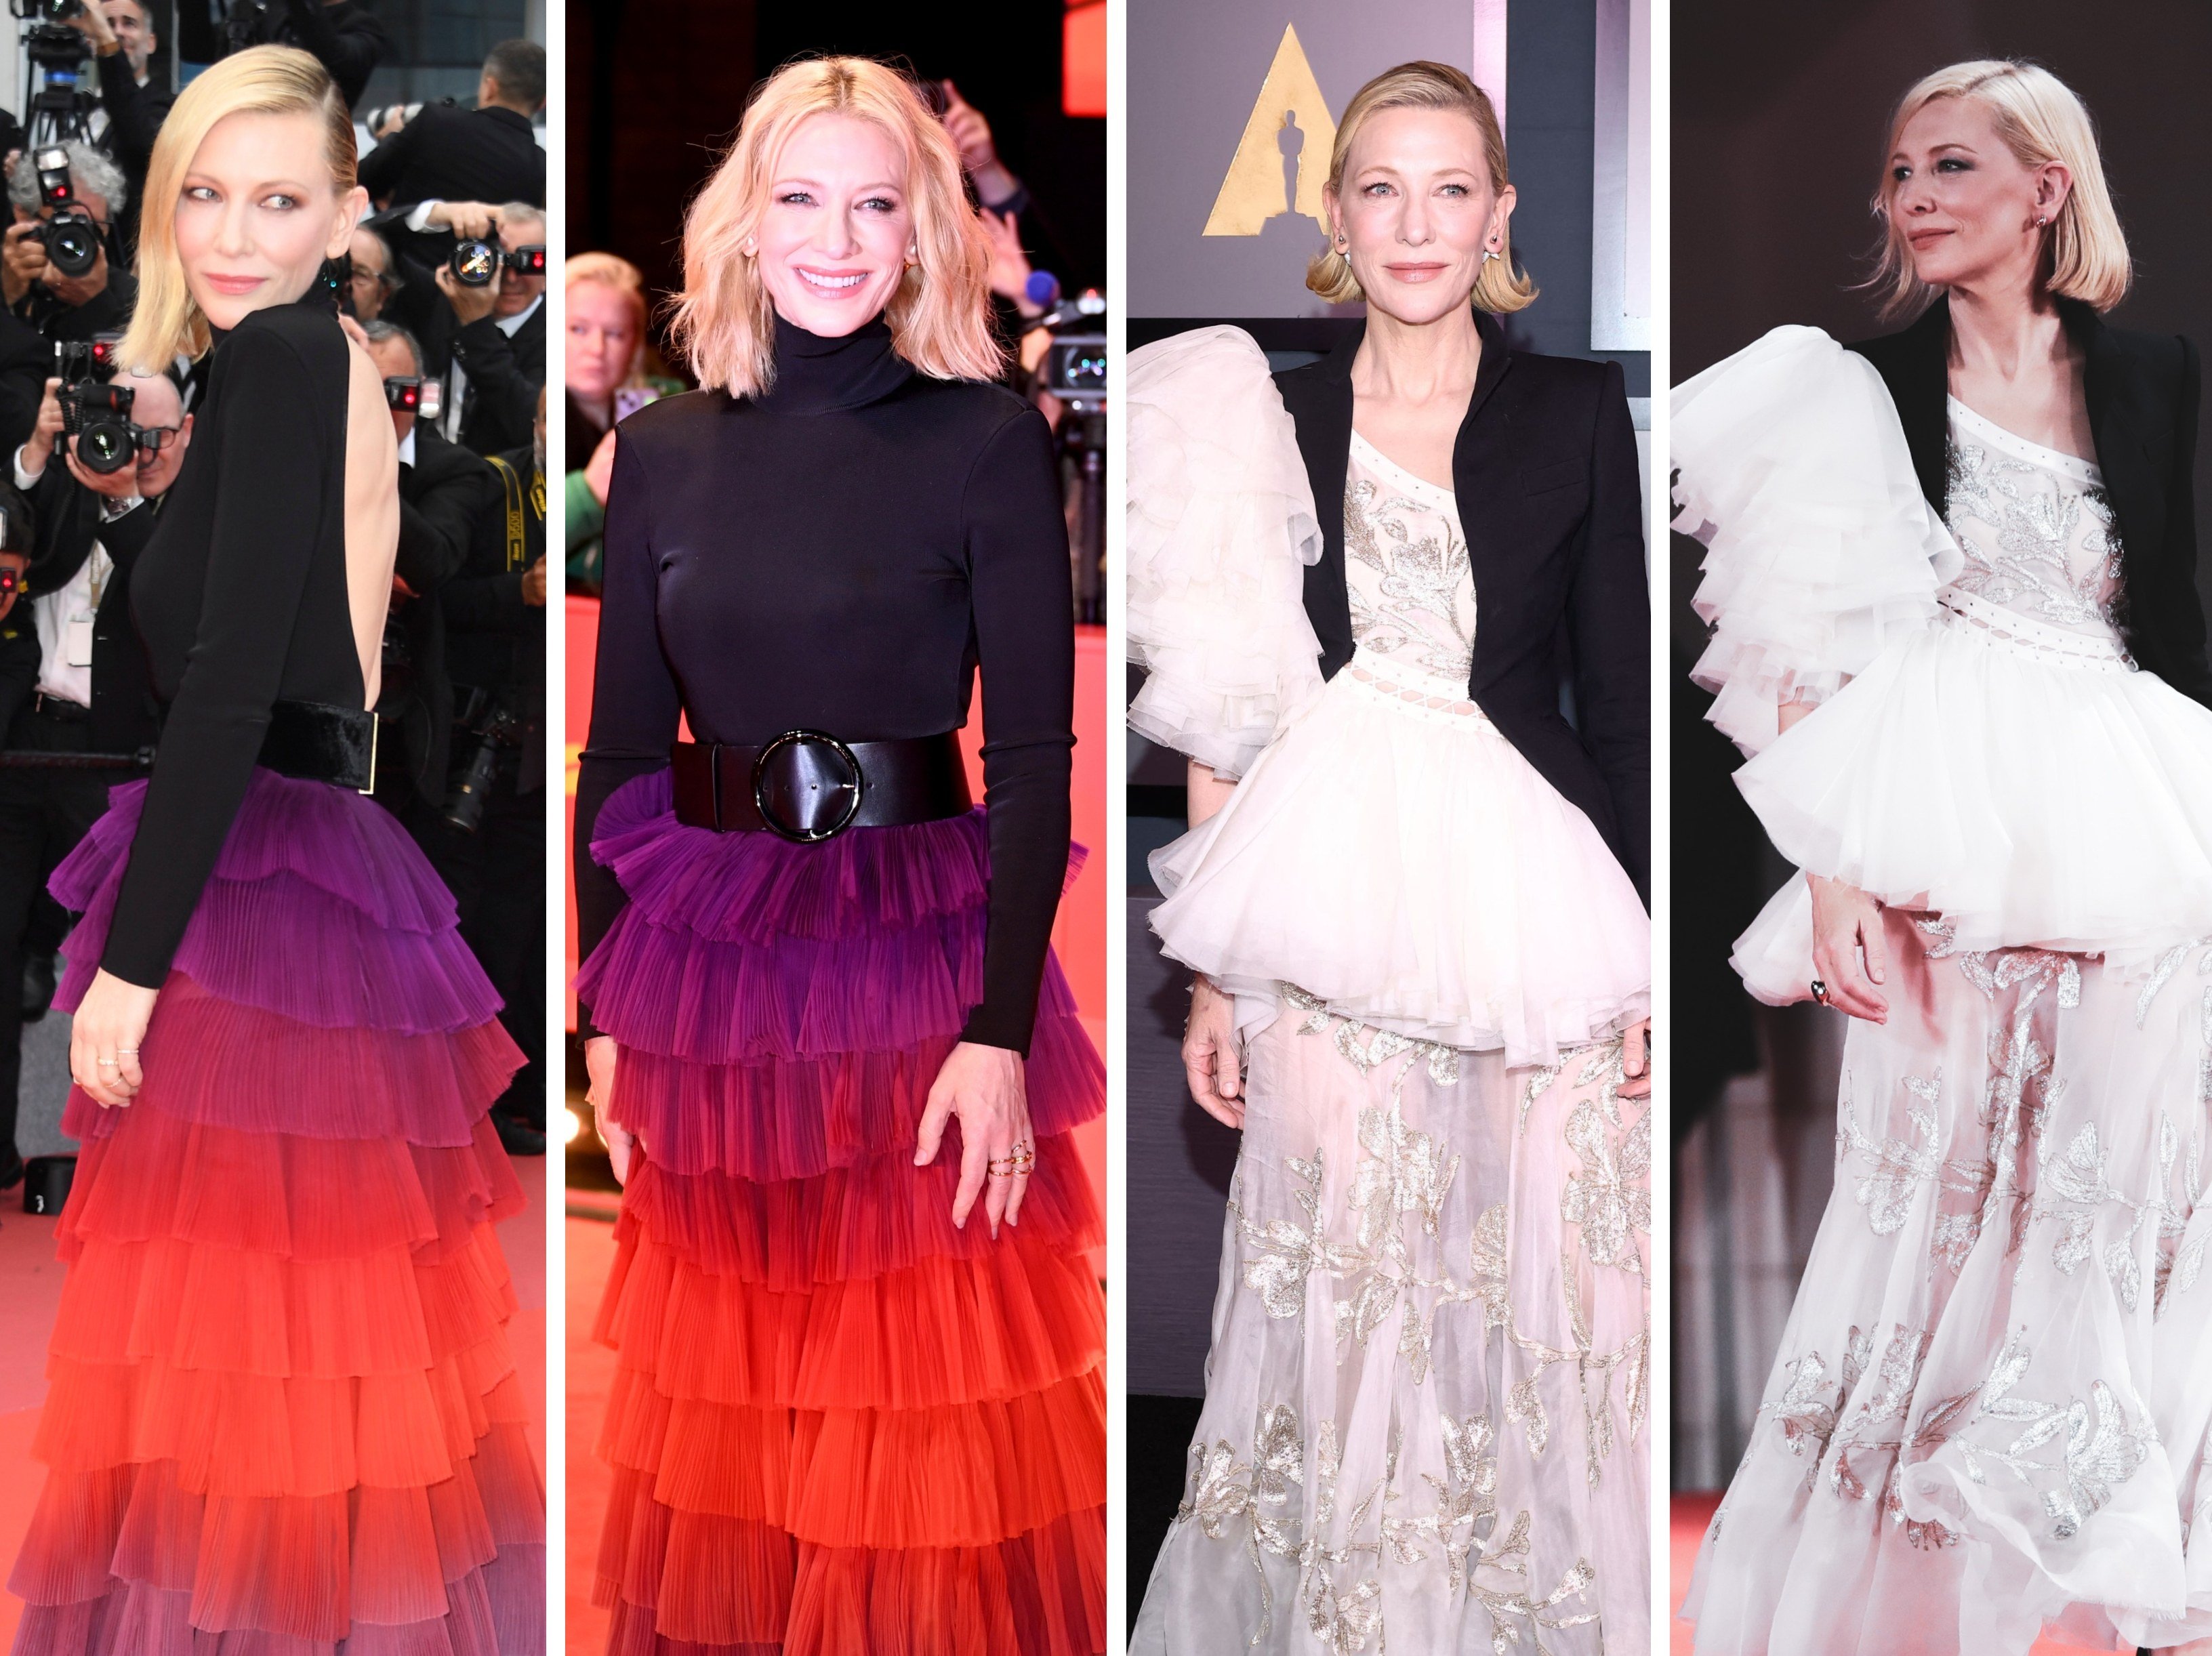 Cate Blanchett’s best red carpet rewears include looks from Givenchy and Alexander McQueen, both worn twice as the Oscar-winning actress walks the talk on sustainability. Photos: AP, AFP, Getty